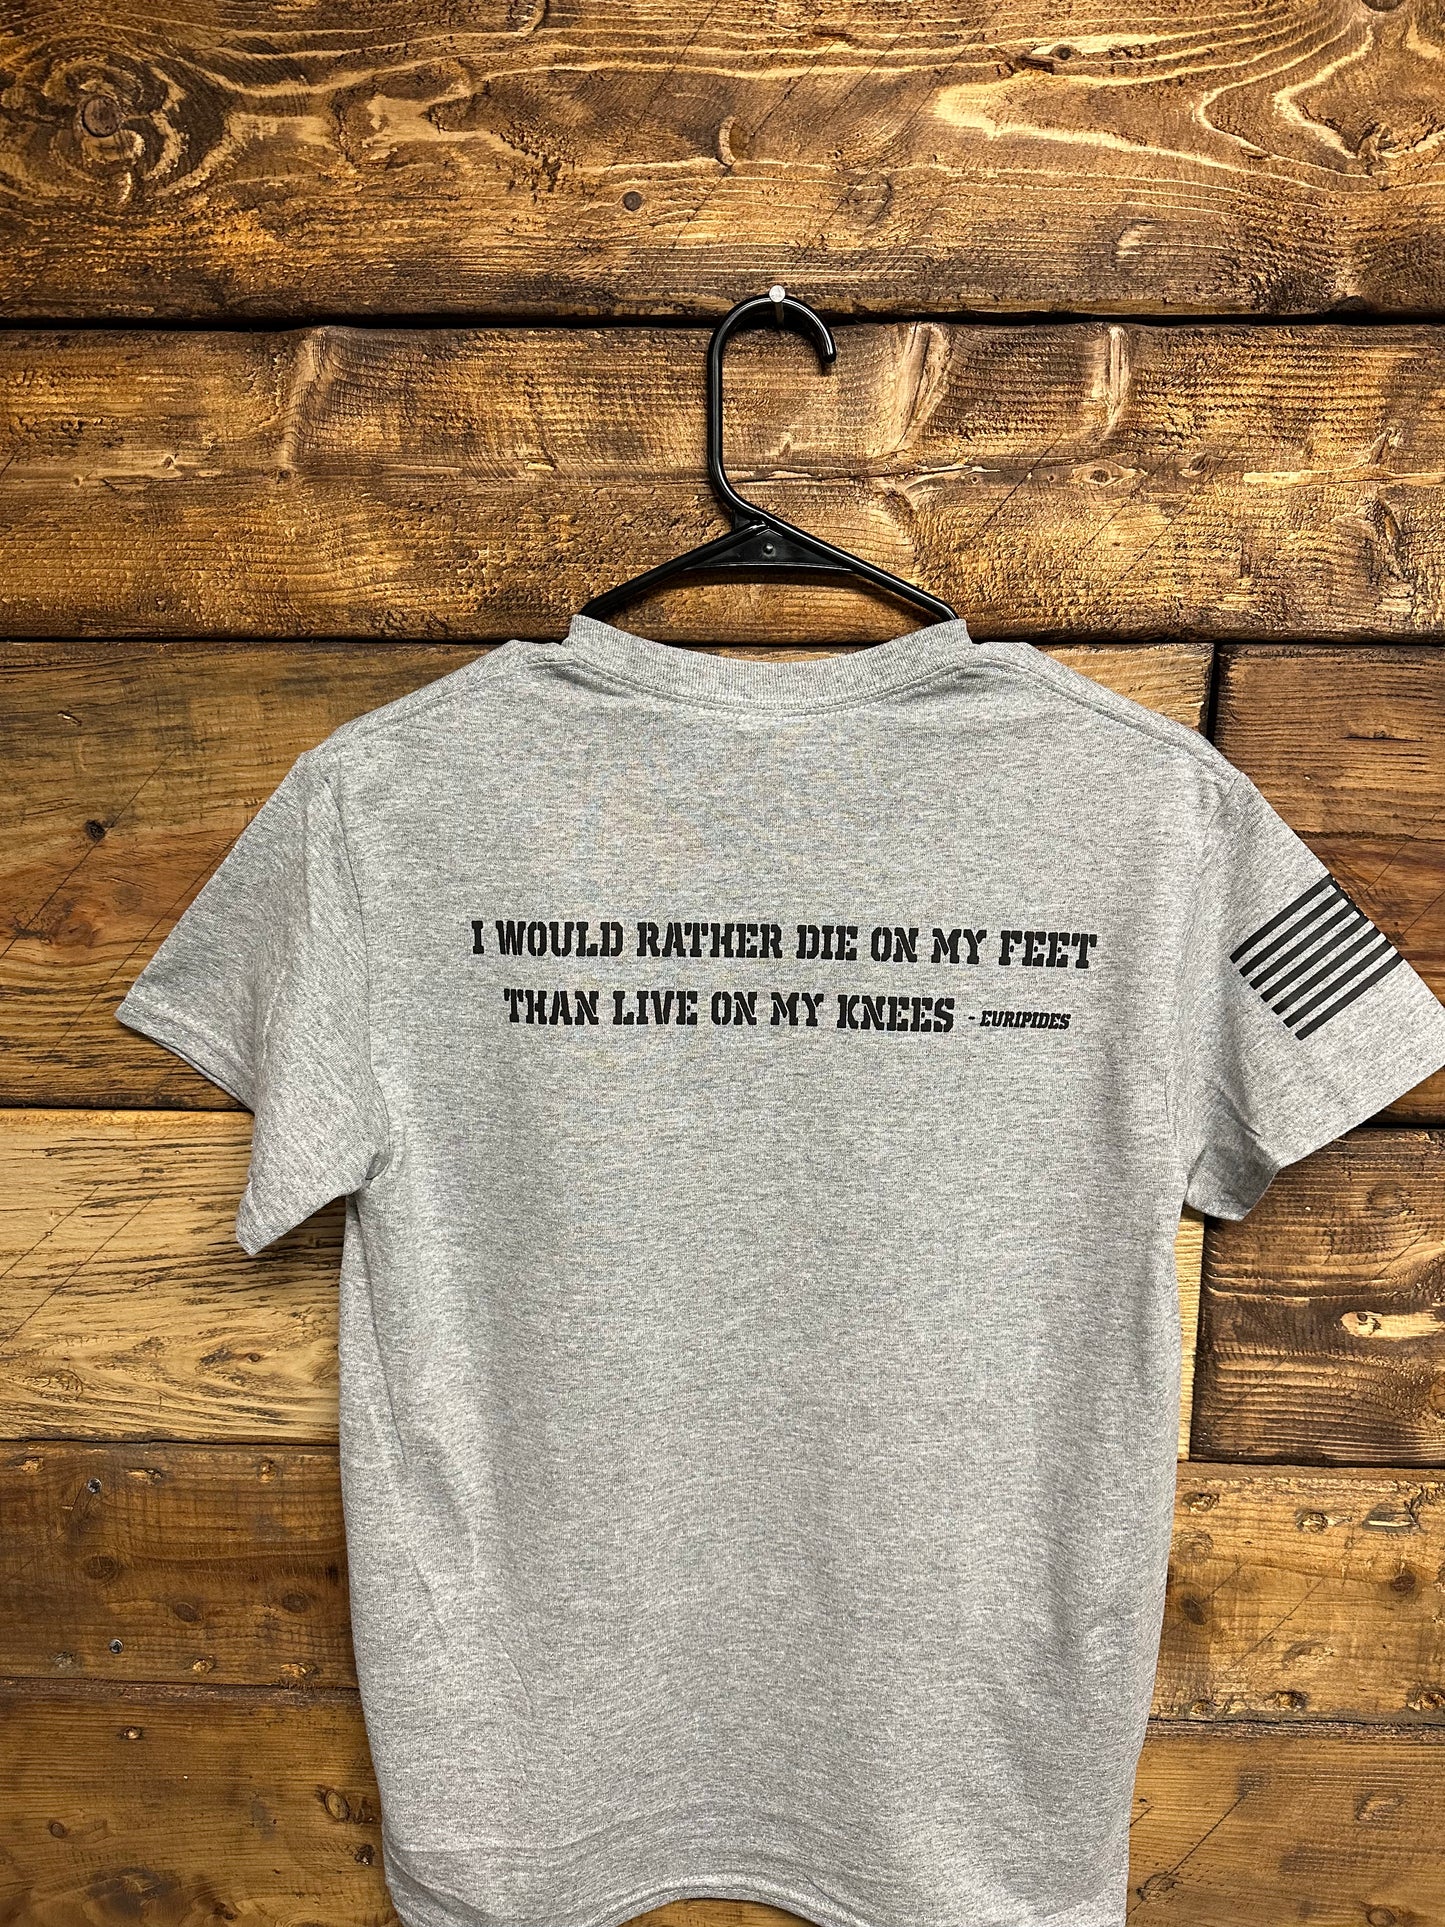 NE Firearms Grey T-Shirt with quote “I would rather die on my feet than live on my knees”